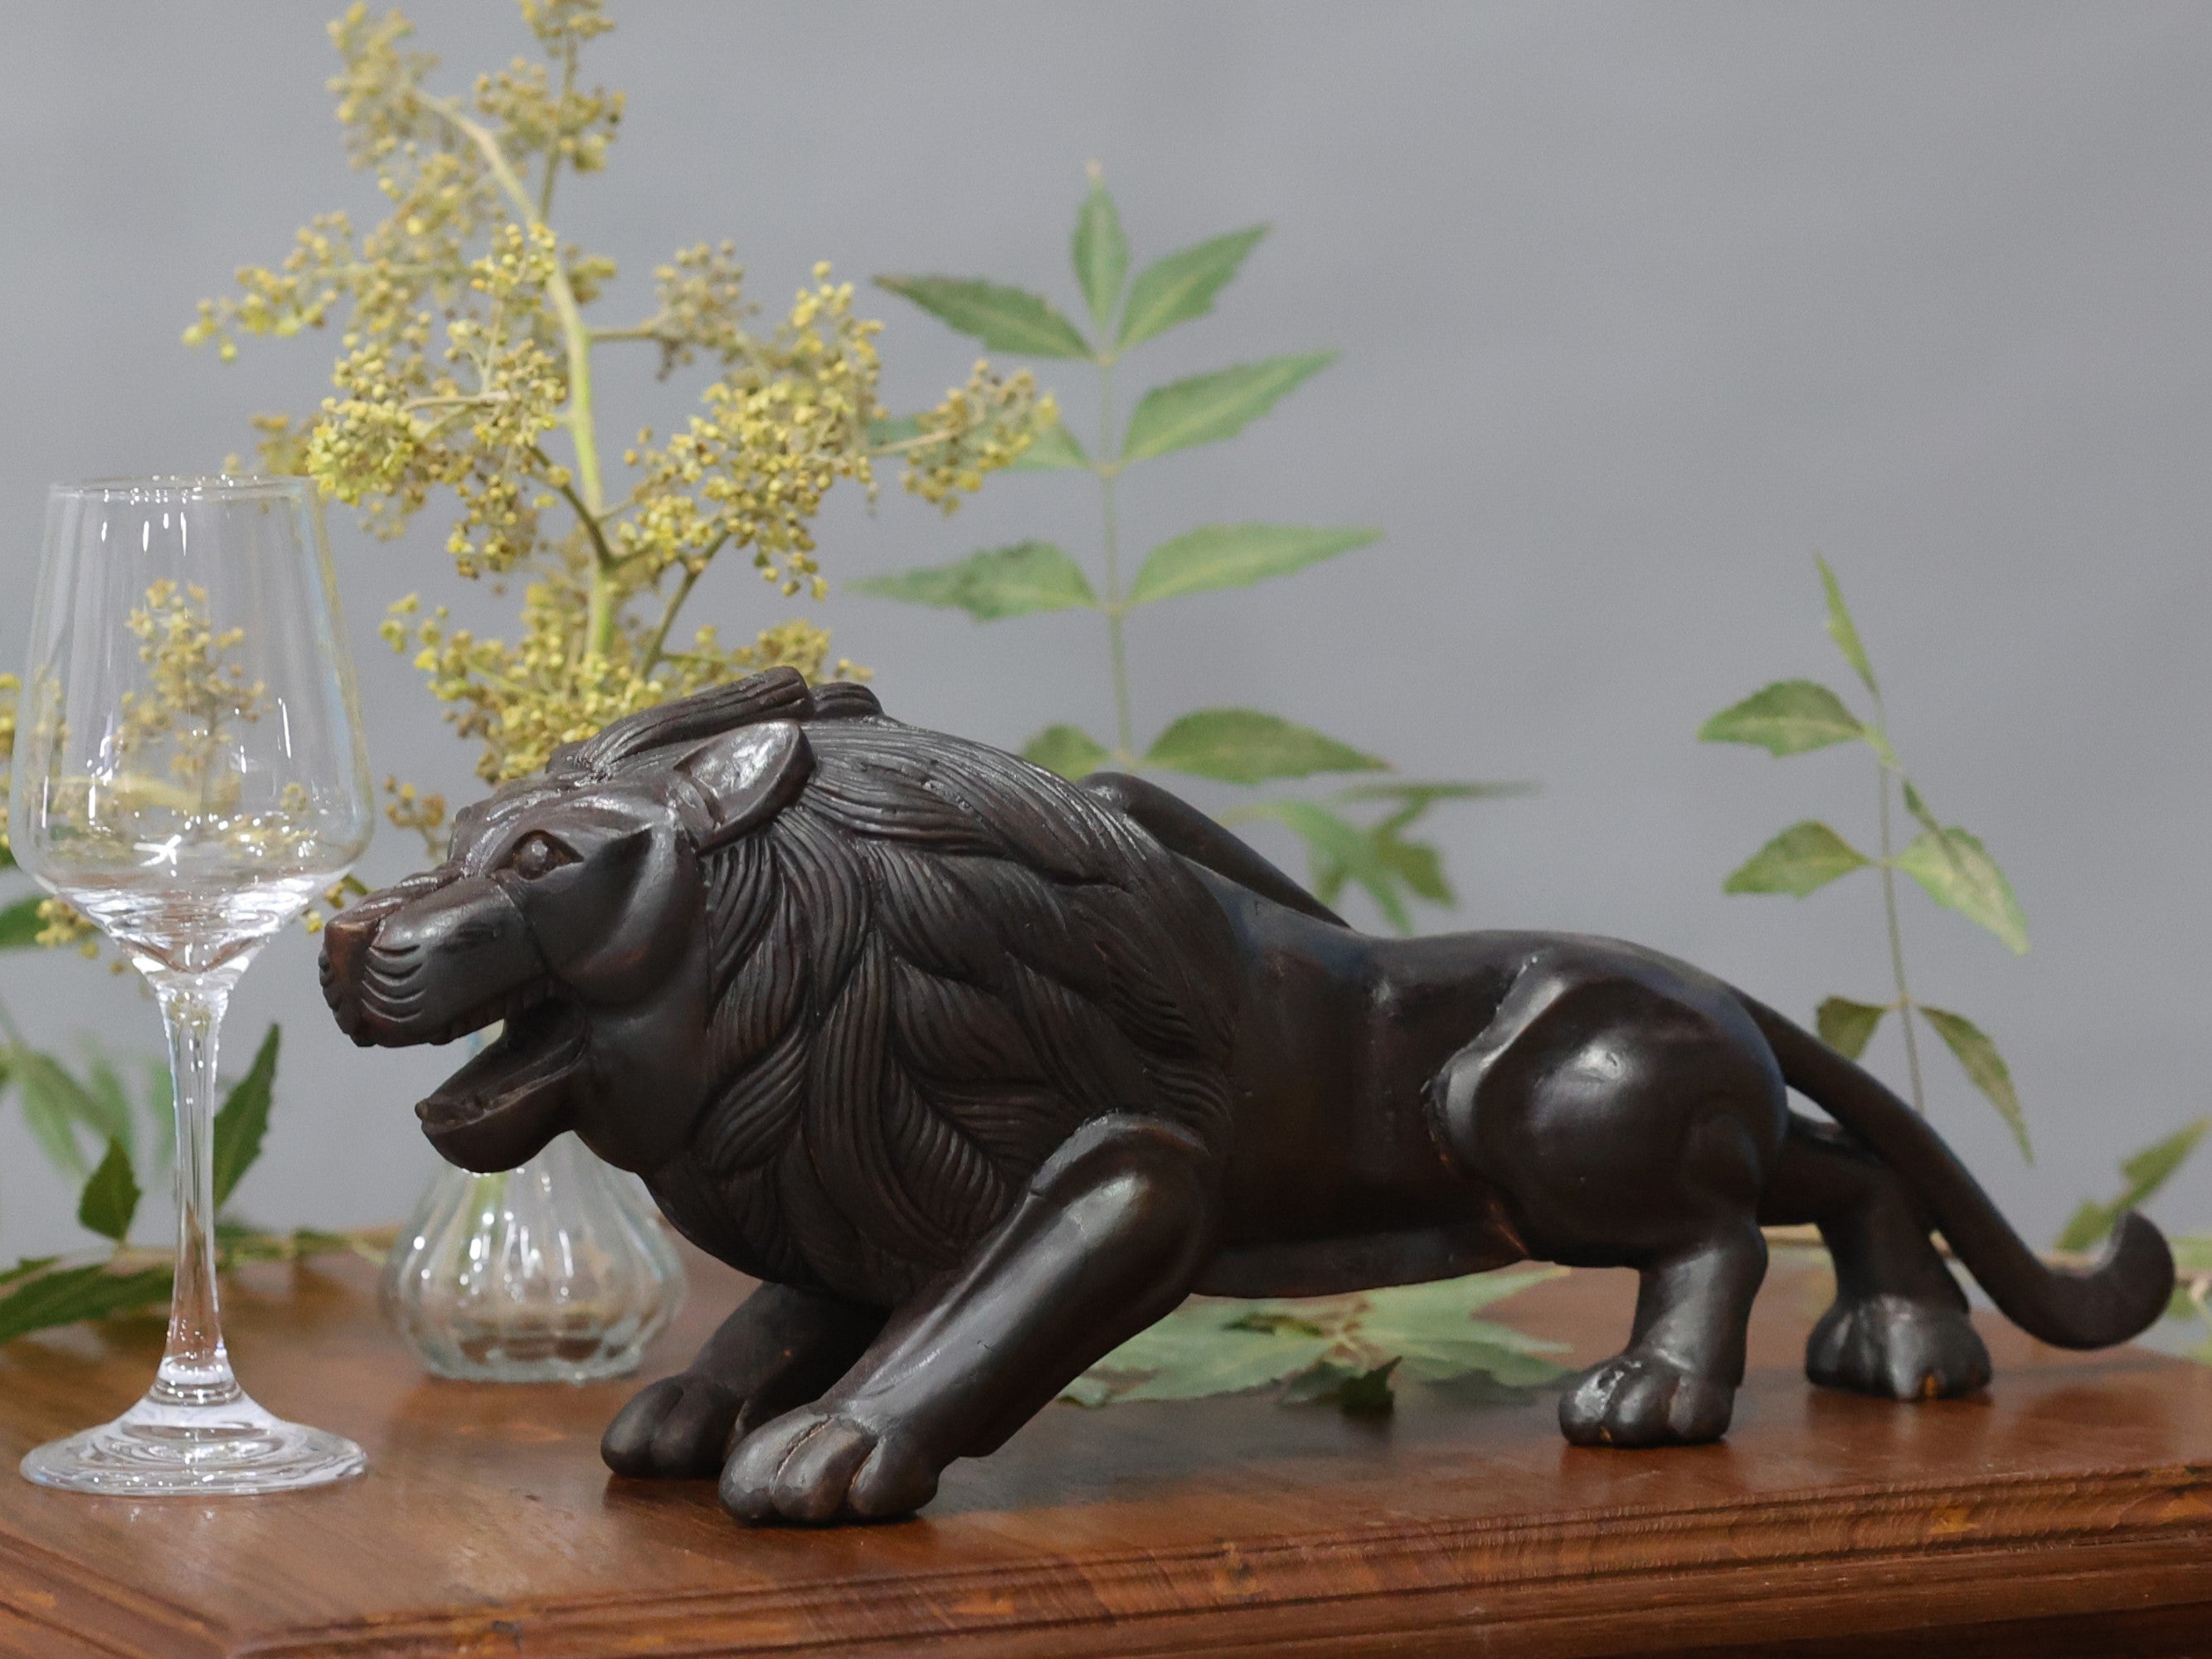 Hand Crafted Wooden Lion Animal Figurine